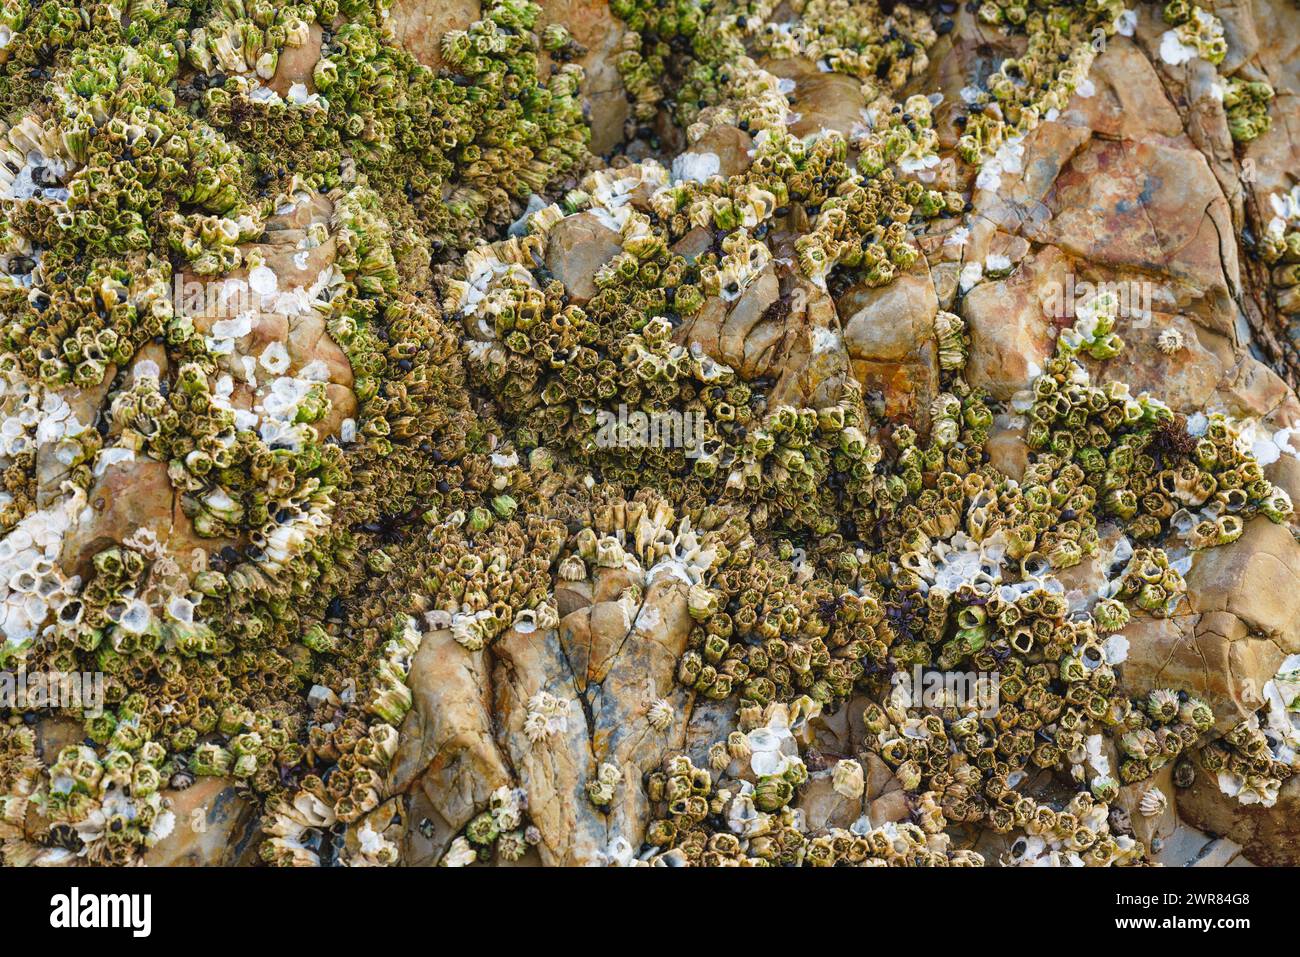 Acorn barnacles, also called rock barnacles, or sessile barnacles,symmetrical shells attached to rocks at Avila Beach, California Stock Photo